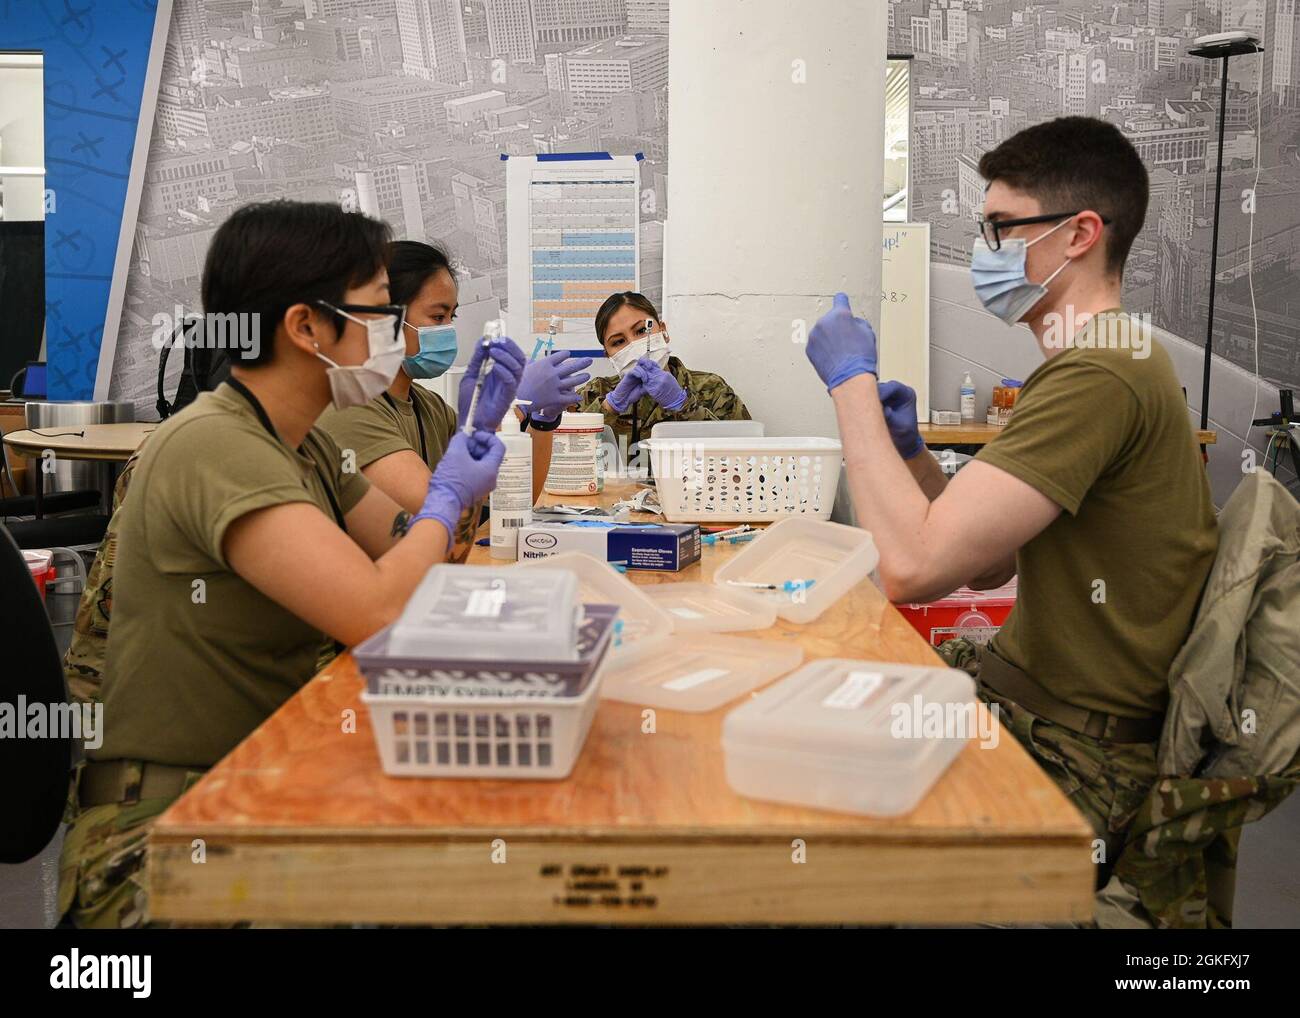 U.S. Airmen prepare doses of the COVID-19 vaccine at the state-run, federally-supported Ford Field Community Vaccination Center in Detroit, April 12, 2021. The Ford Field CVC is designed to vaccinate up to 6,000 community members per day. U.S. Northern Command, through U.S. Army North, remains committed to providing continued, flexible Department of Defense support to the Federal Emergency Management Agency as part of the whole-of-government response to COVID-19. Stock Photo